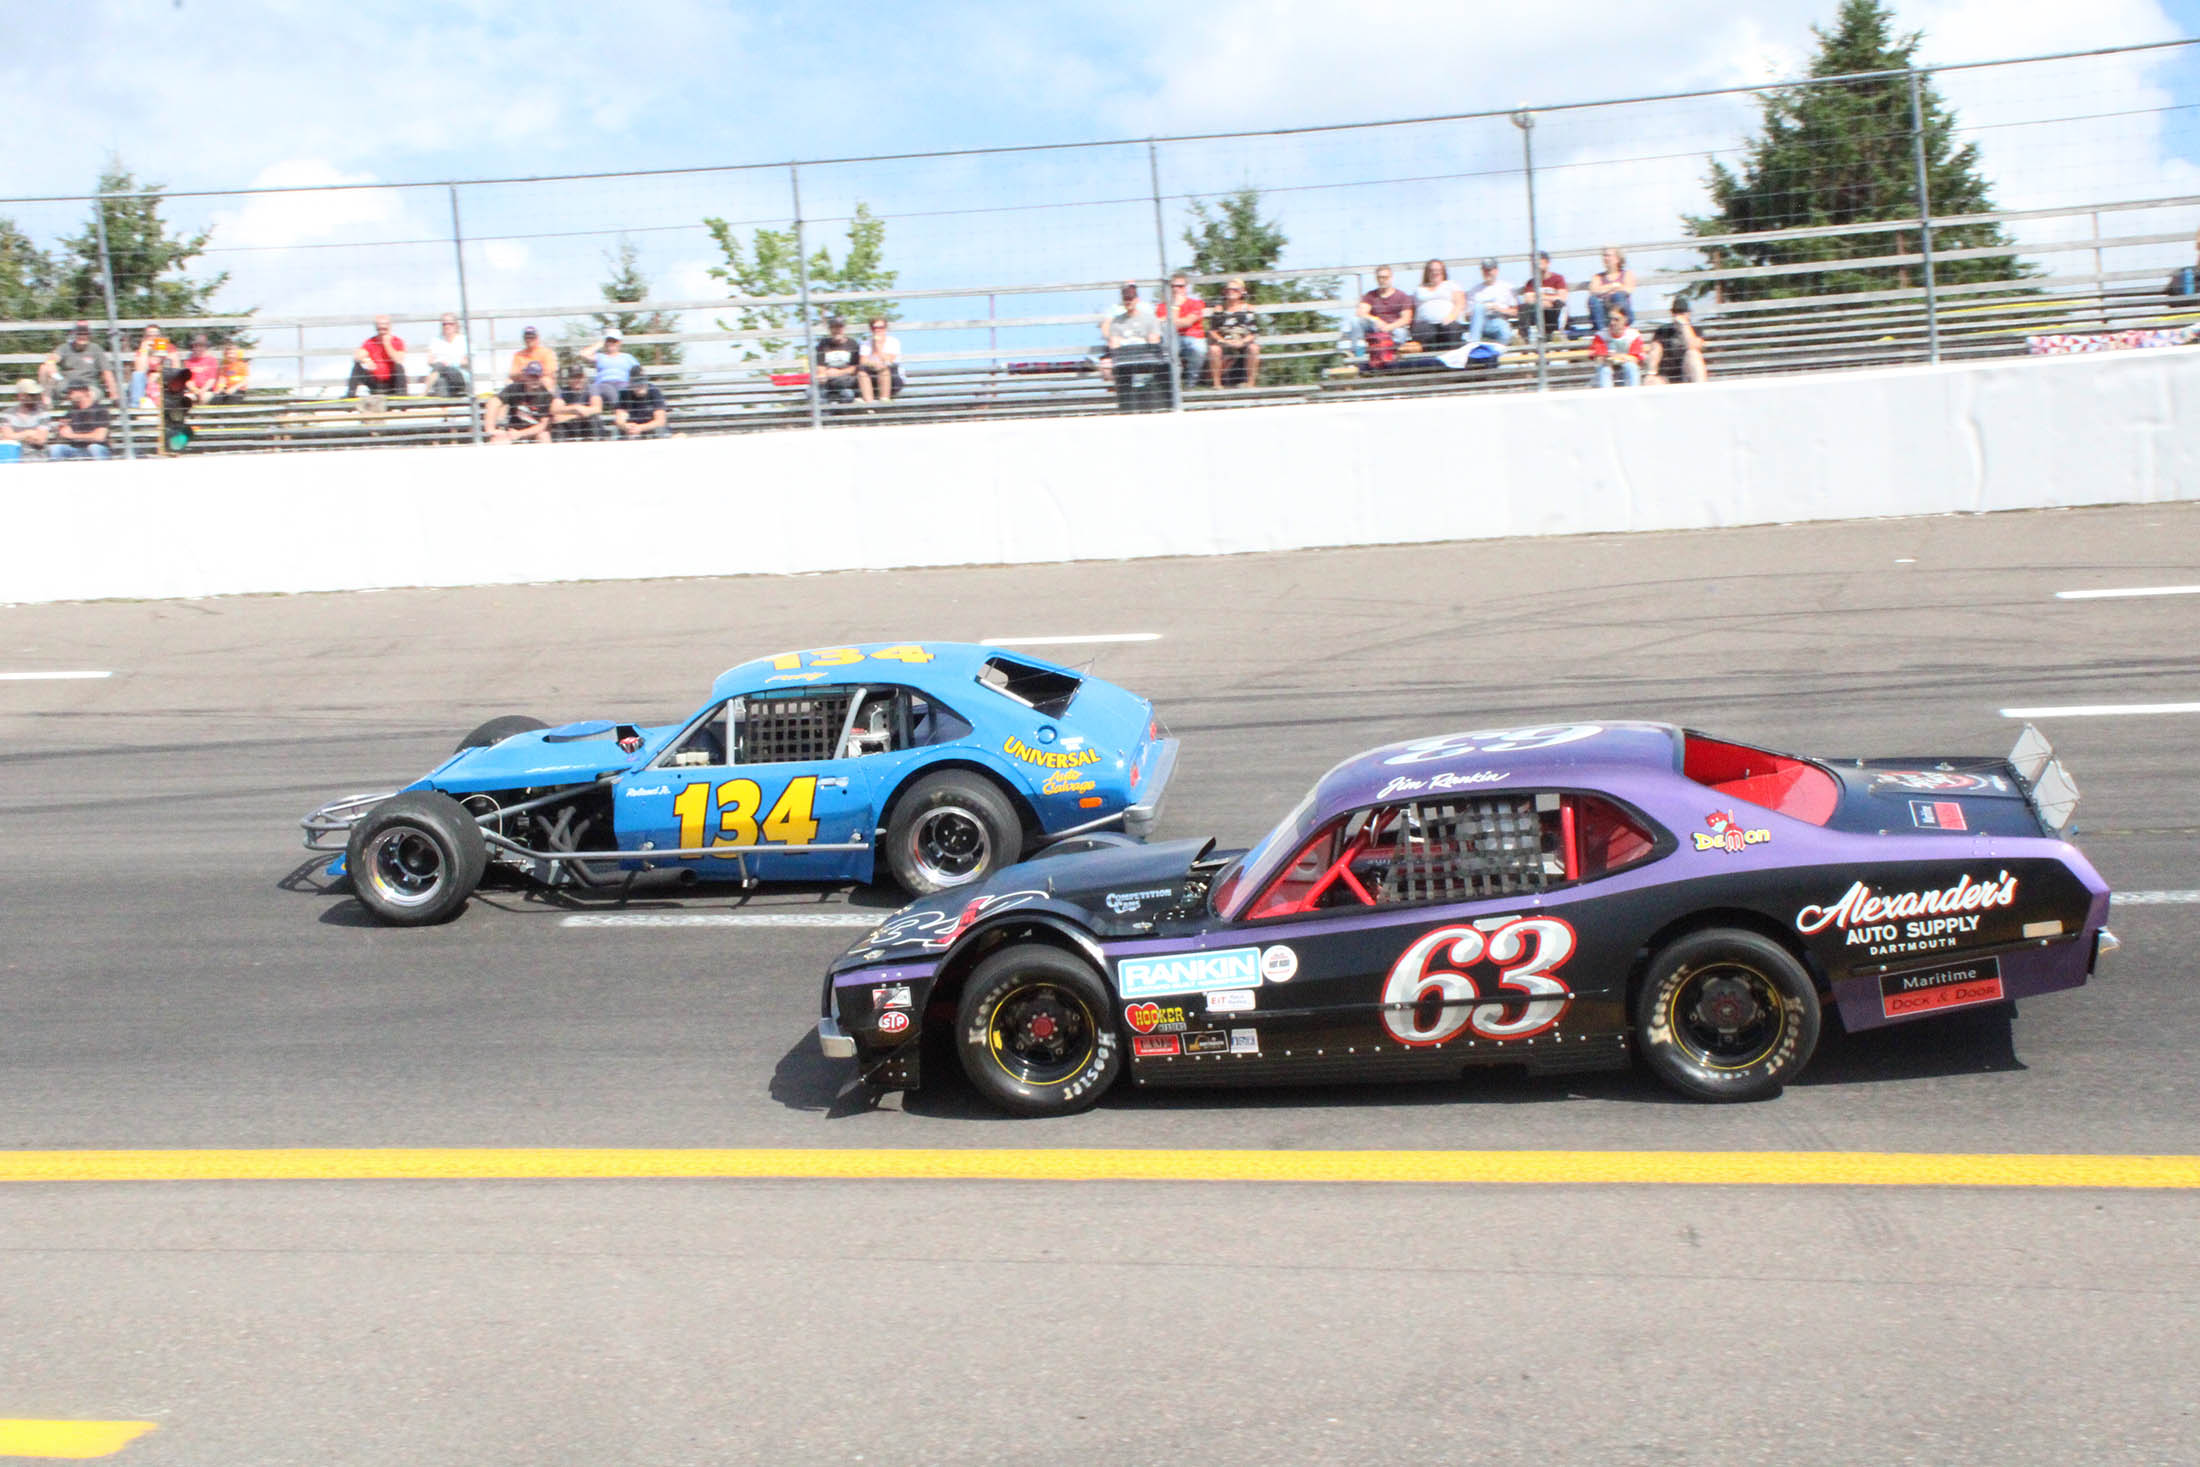 HEART OF A CHAMPION HOT ROD CLASSICS ADDED TO SPEEDWEEKEND SUNDAY